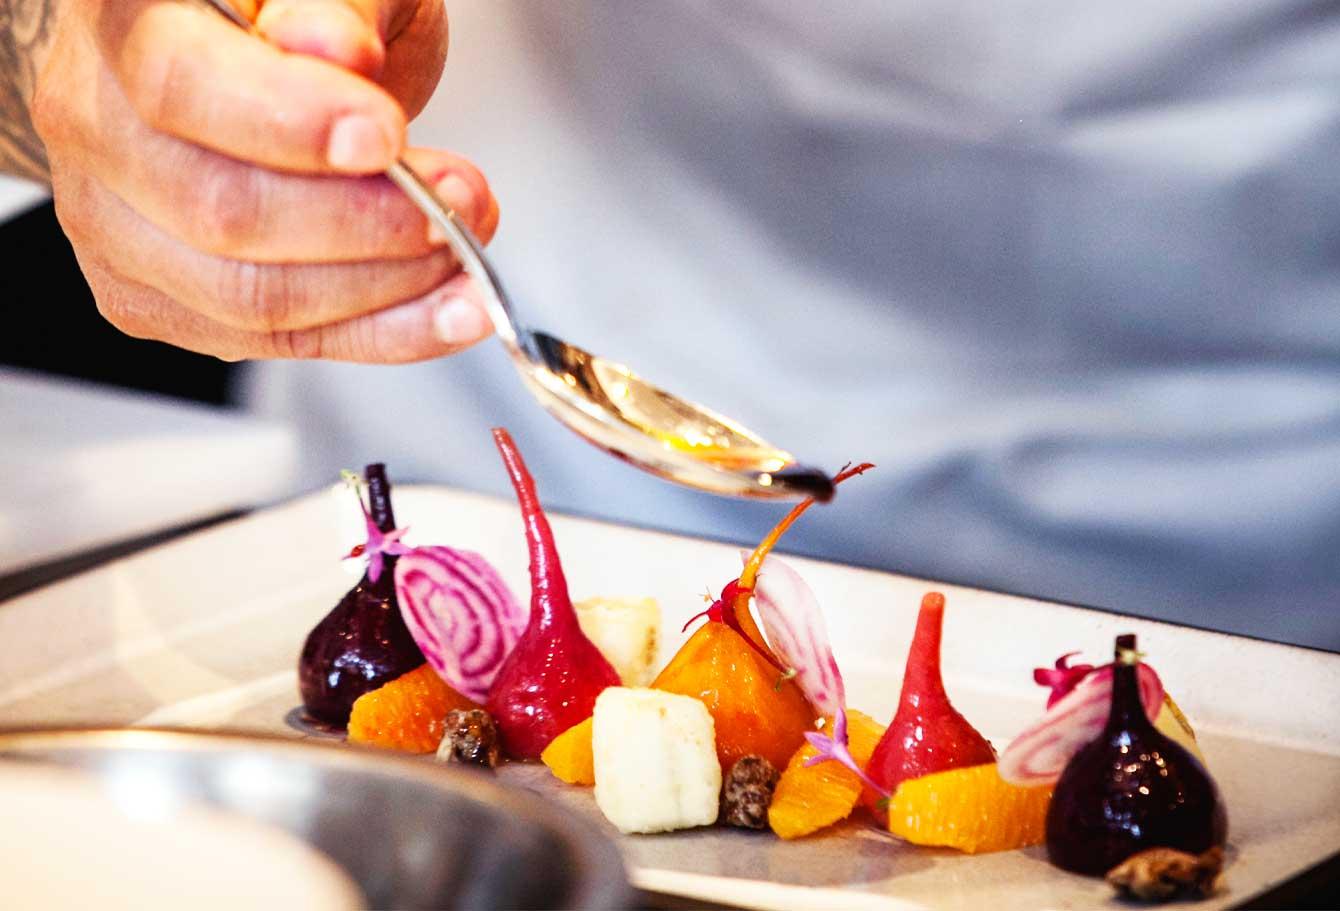 Chef plating dish of roasted beets